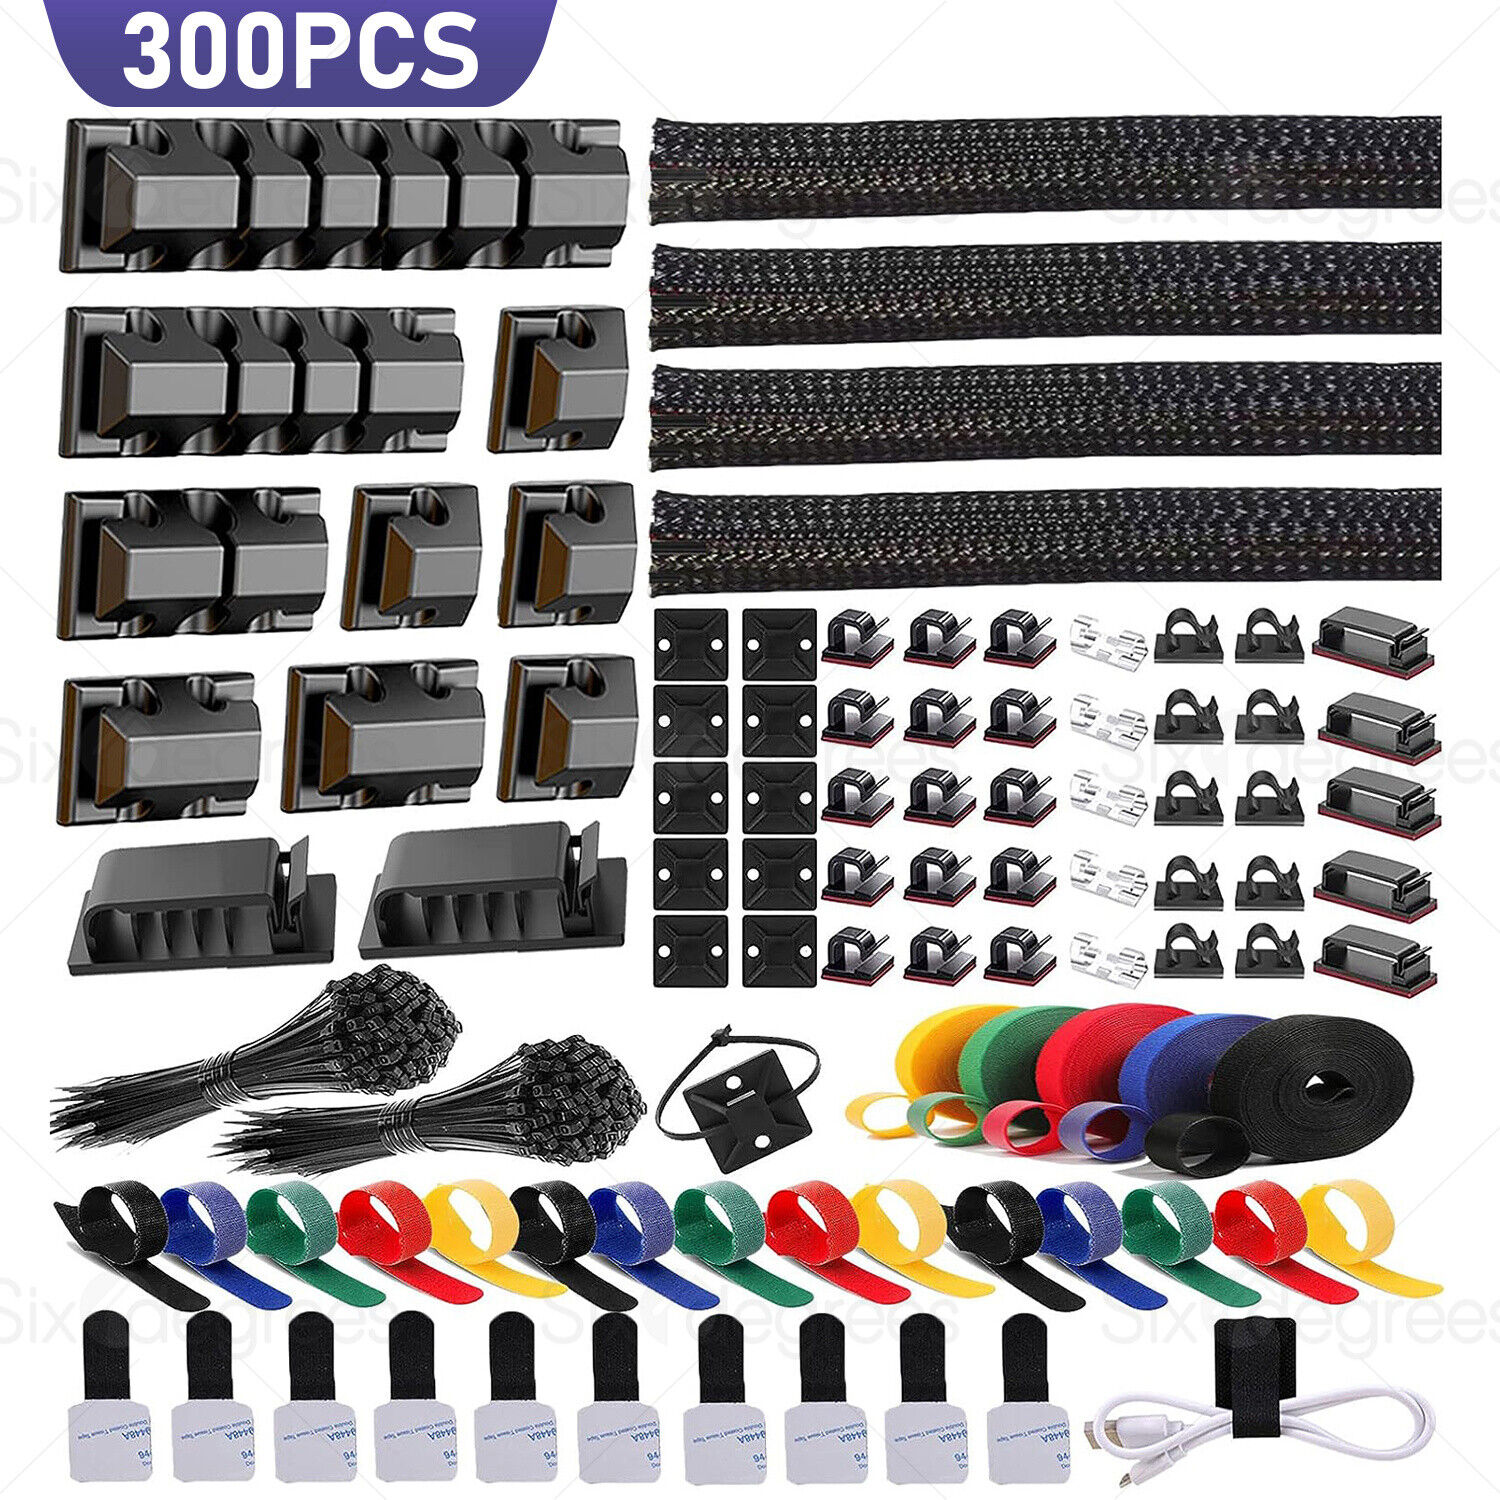 300X Cable Holder Management Clip Tie Charger Wire Tidy Lead Desk USB Organizer